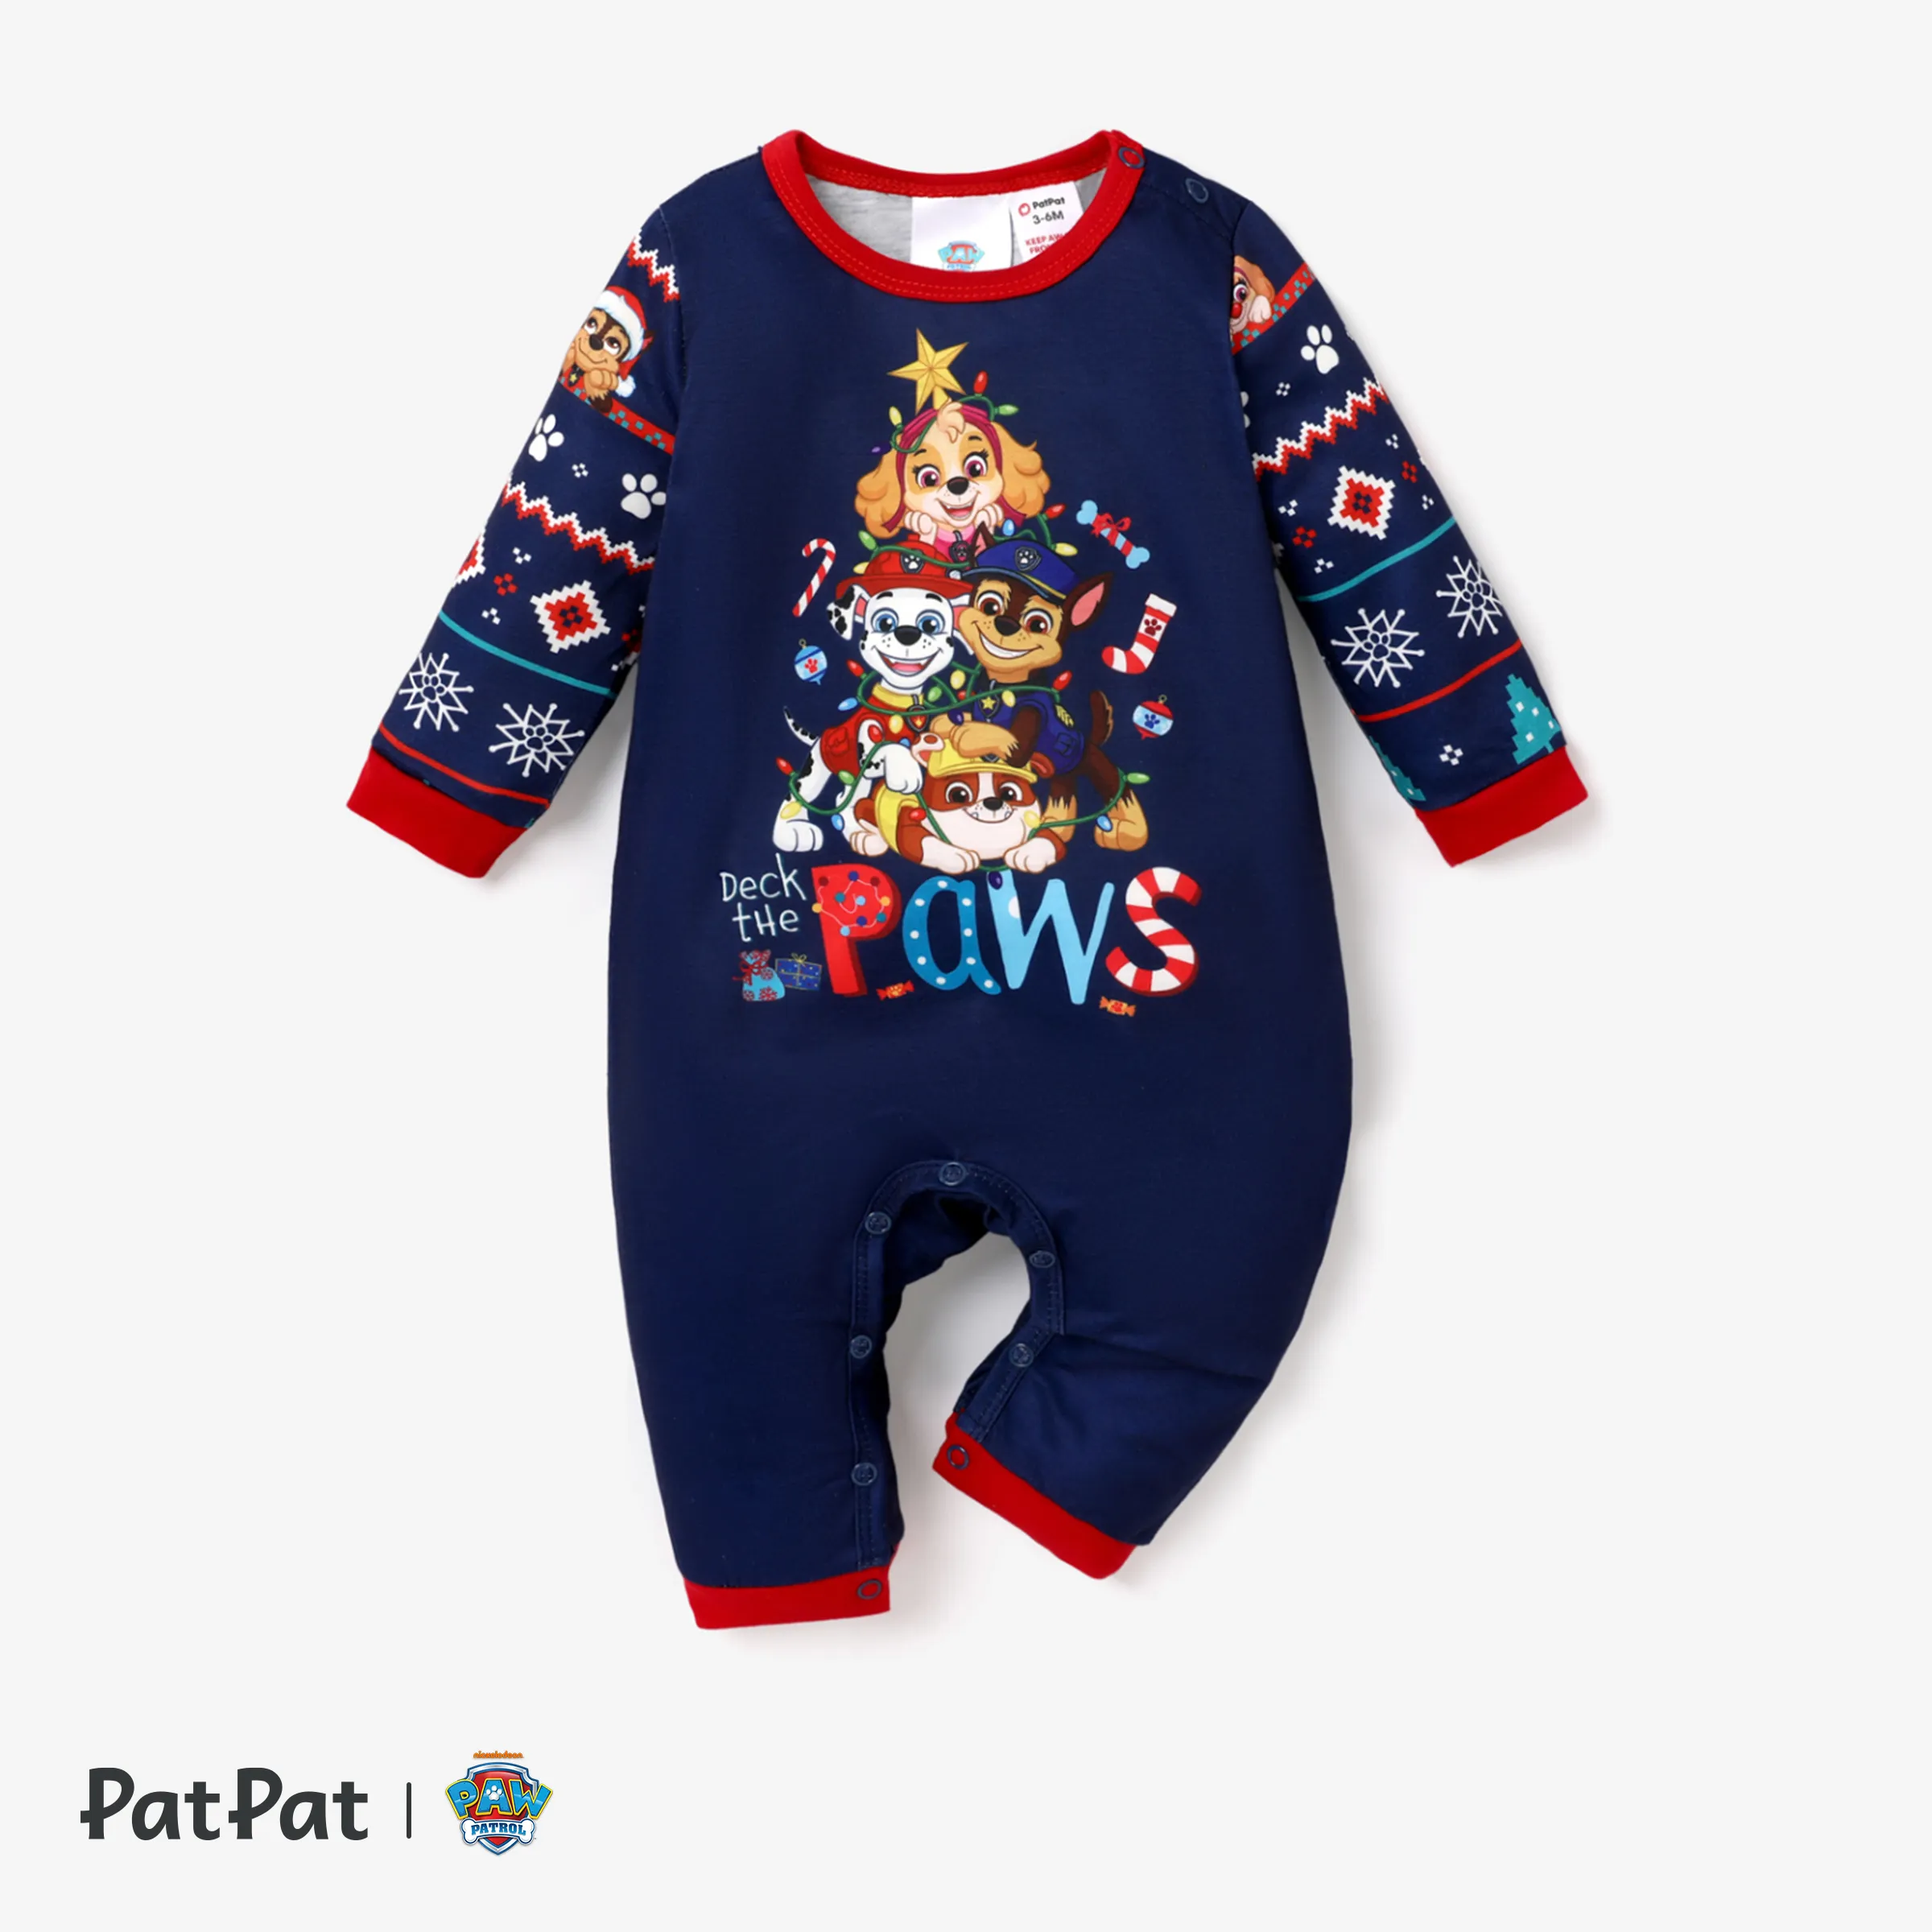 PAW Patrol Christmas Family Matching Character Allover Print Long-sleeve Pajamas Sets(Flame Resistant)